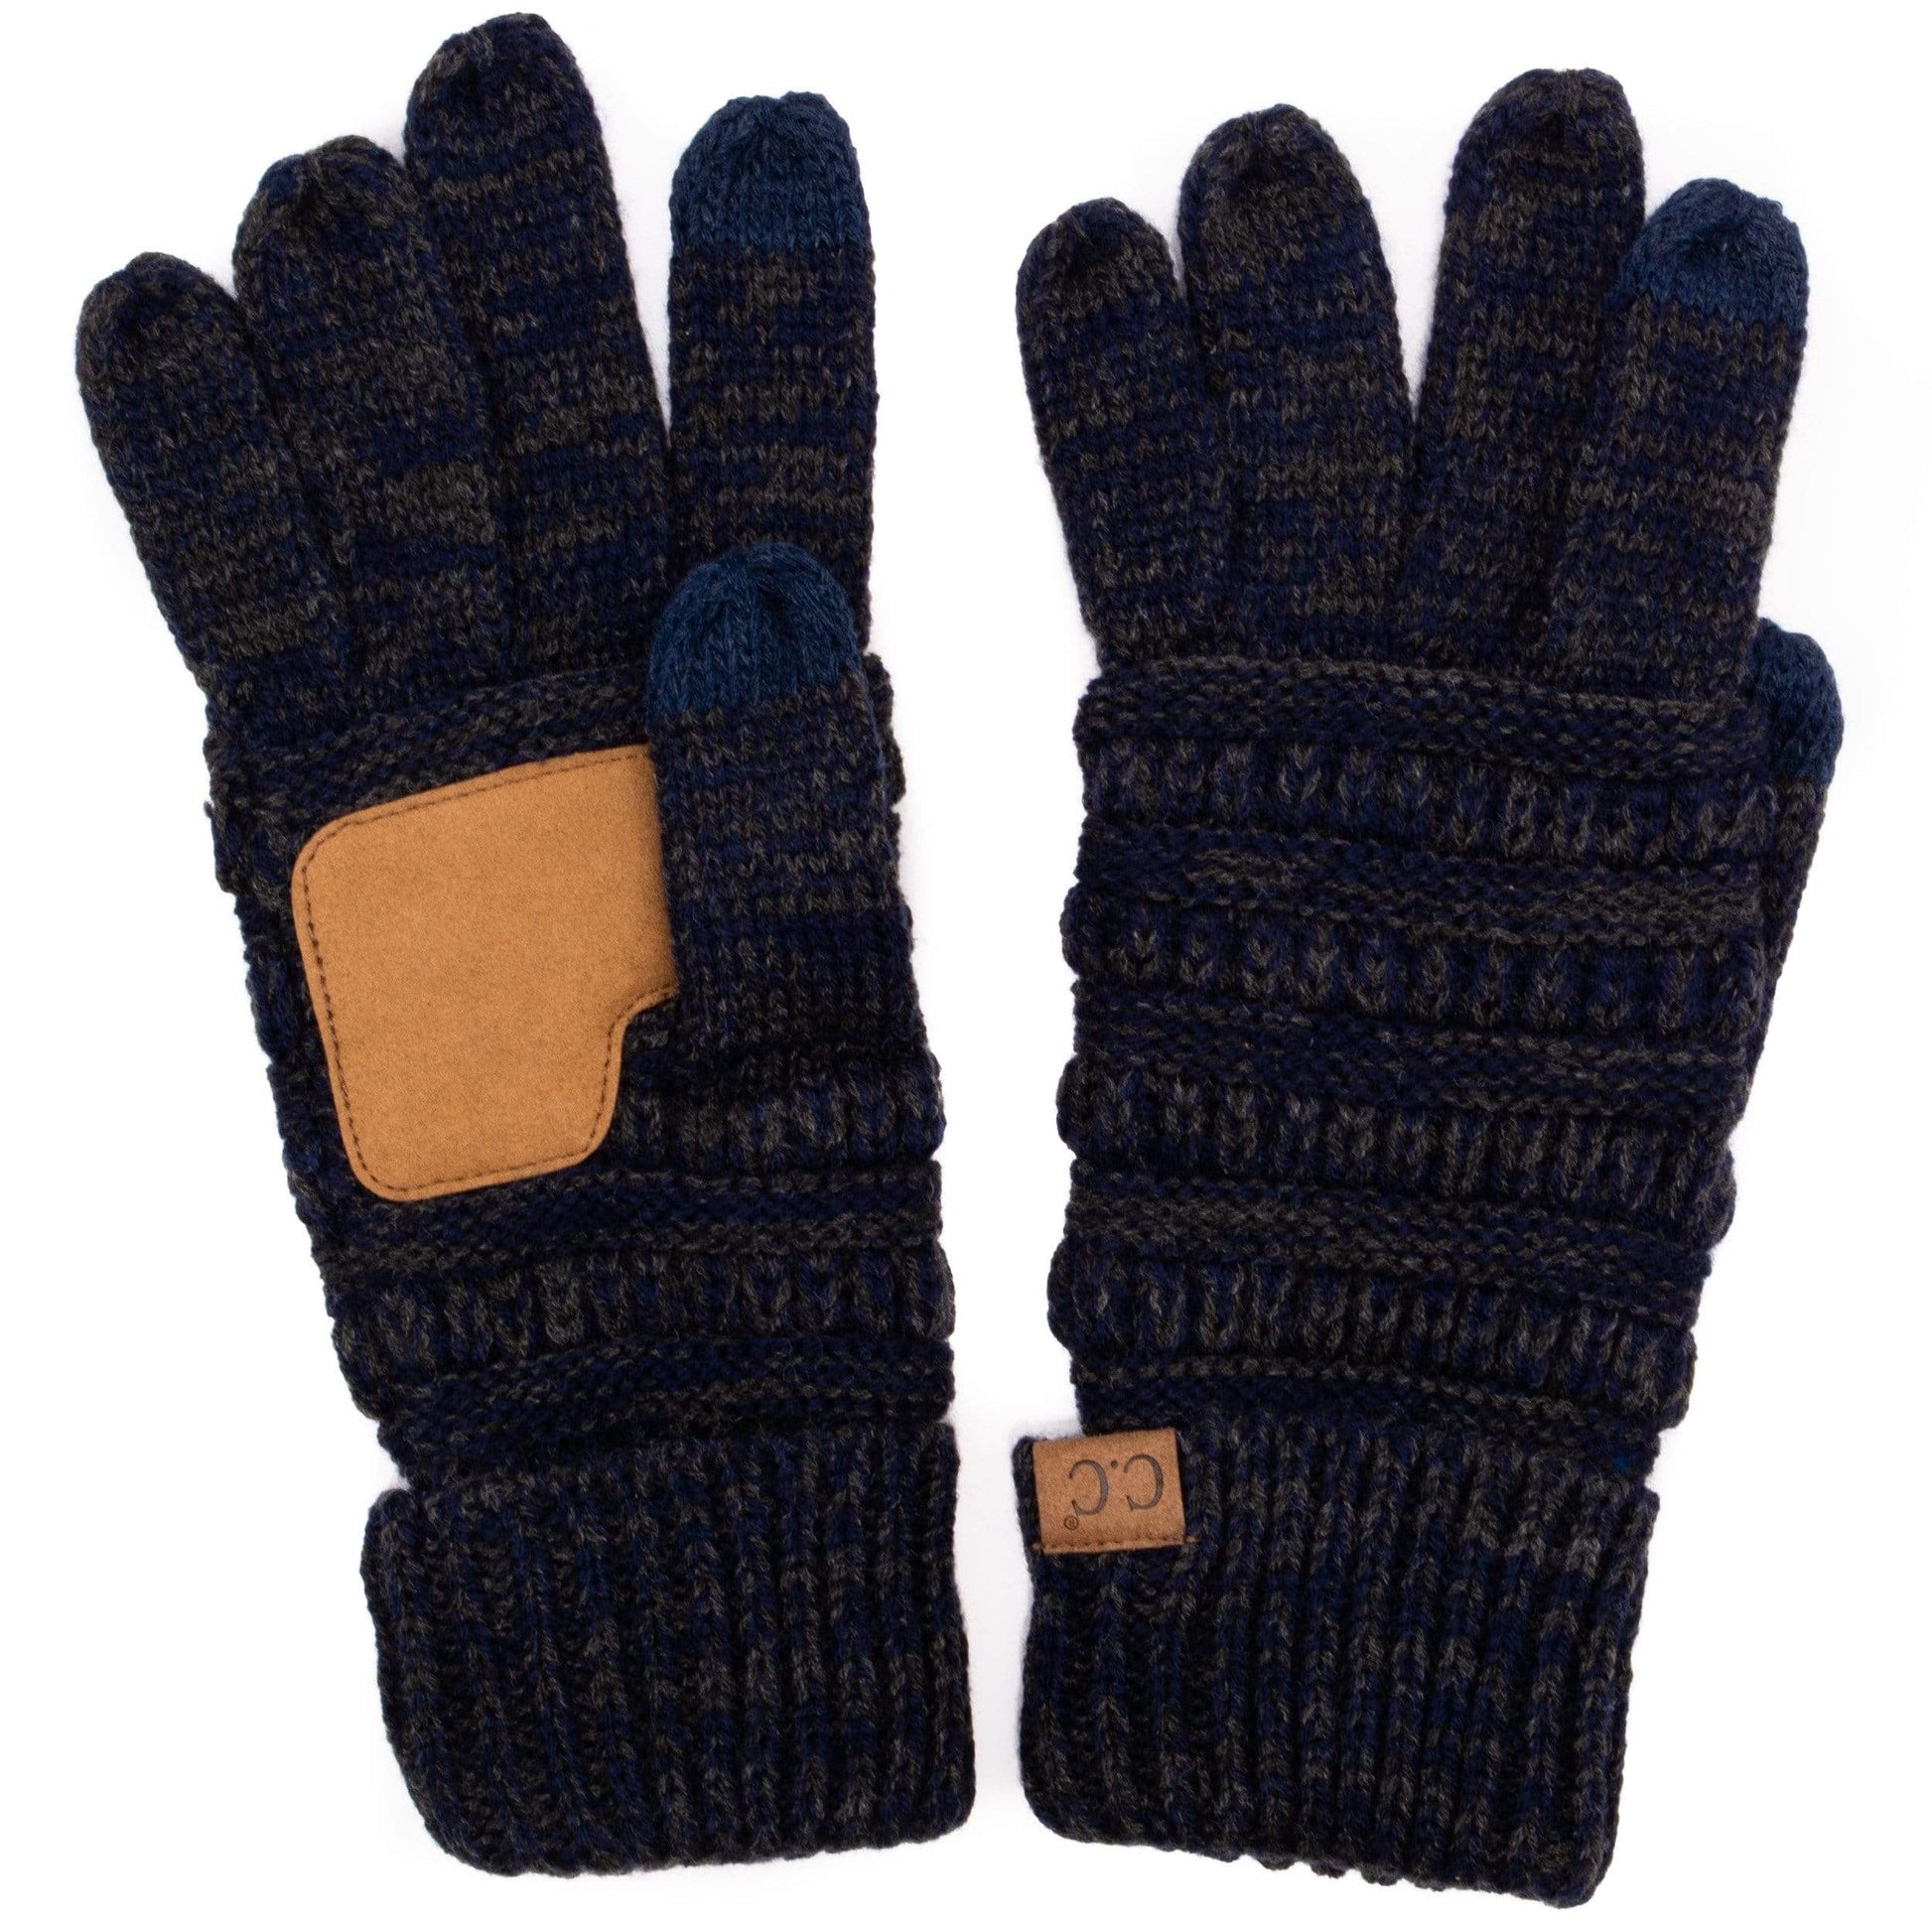 C.C Apparel Navy/Dk Grey C.C Unisex Cable Knit Winter Warm Anti-Slip Two-Toned Touchscreen Texting Gloves